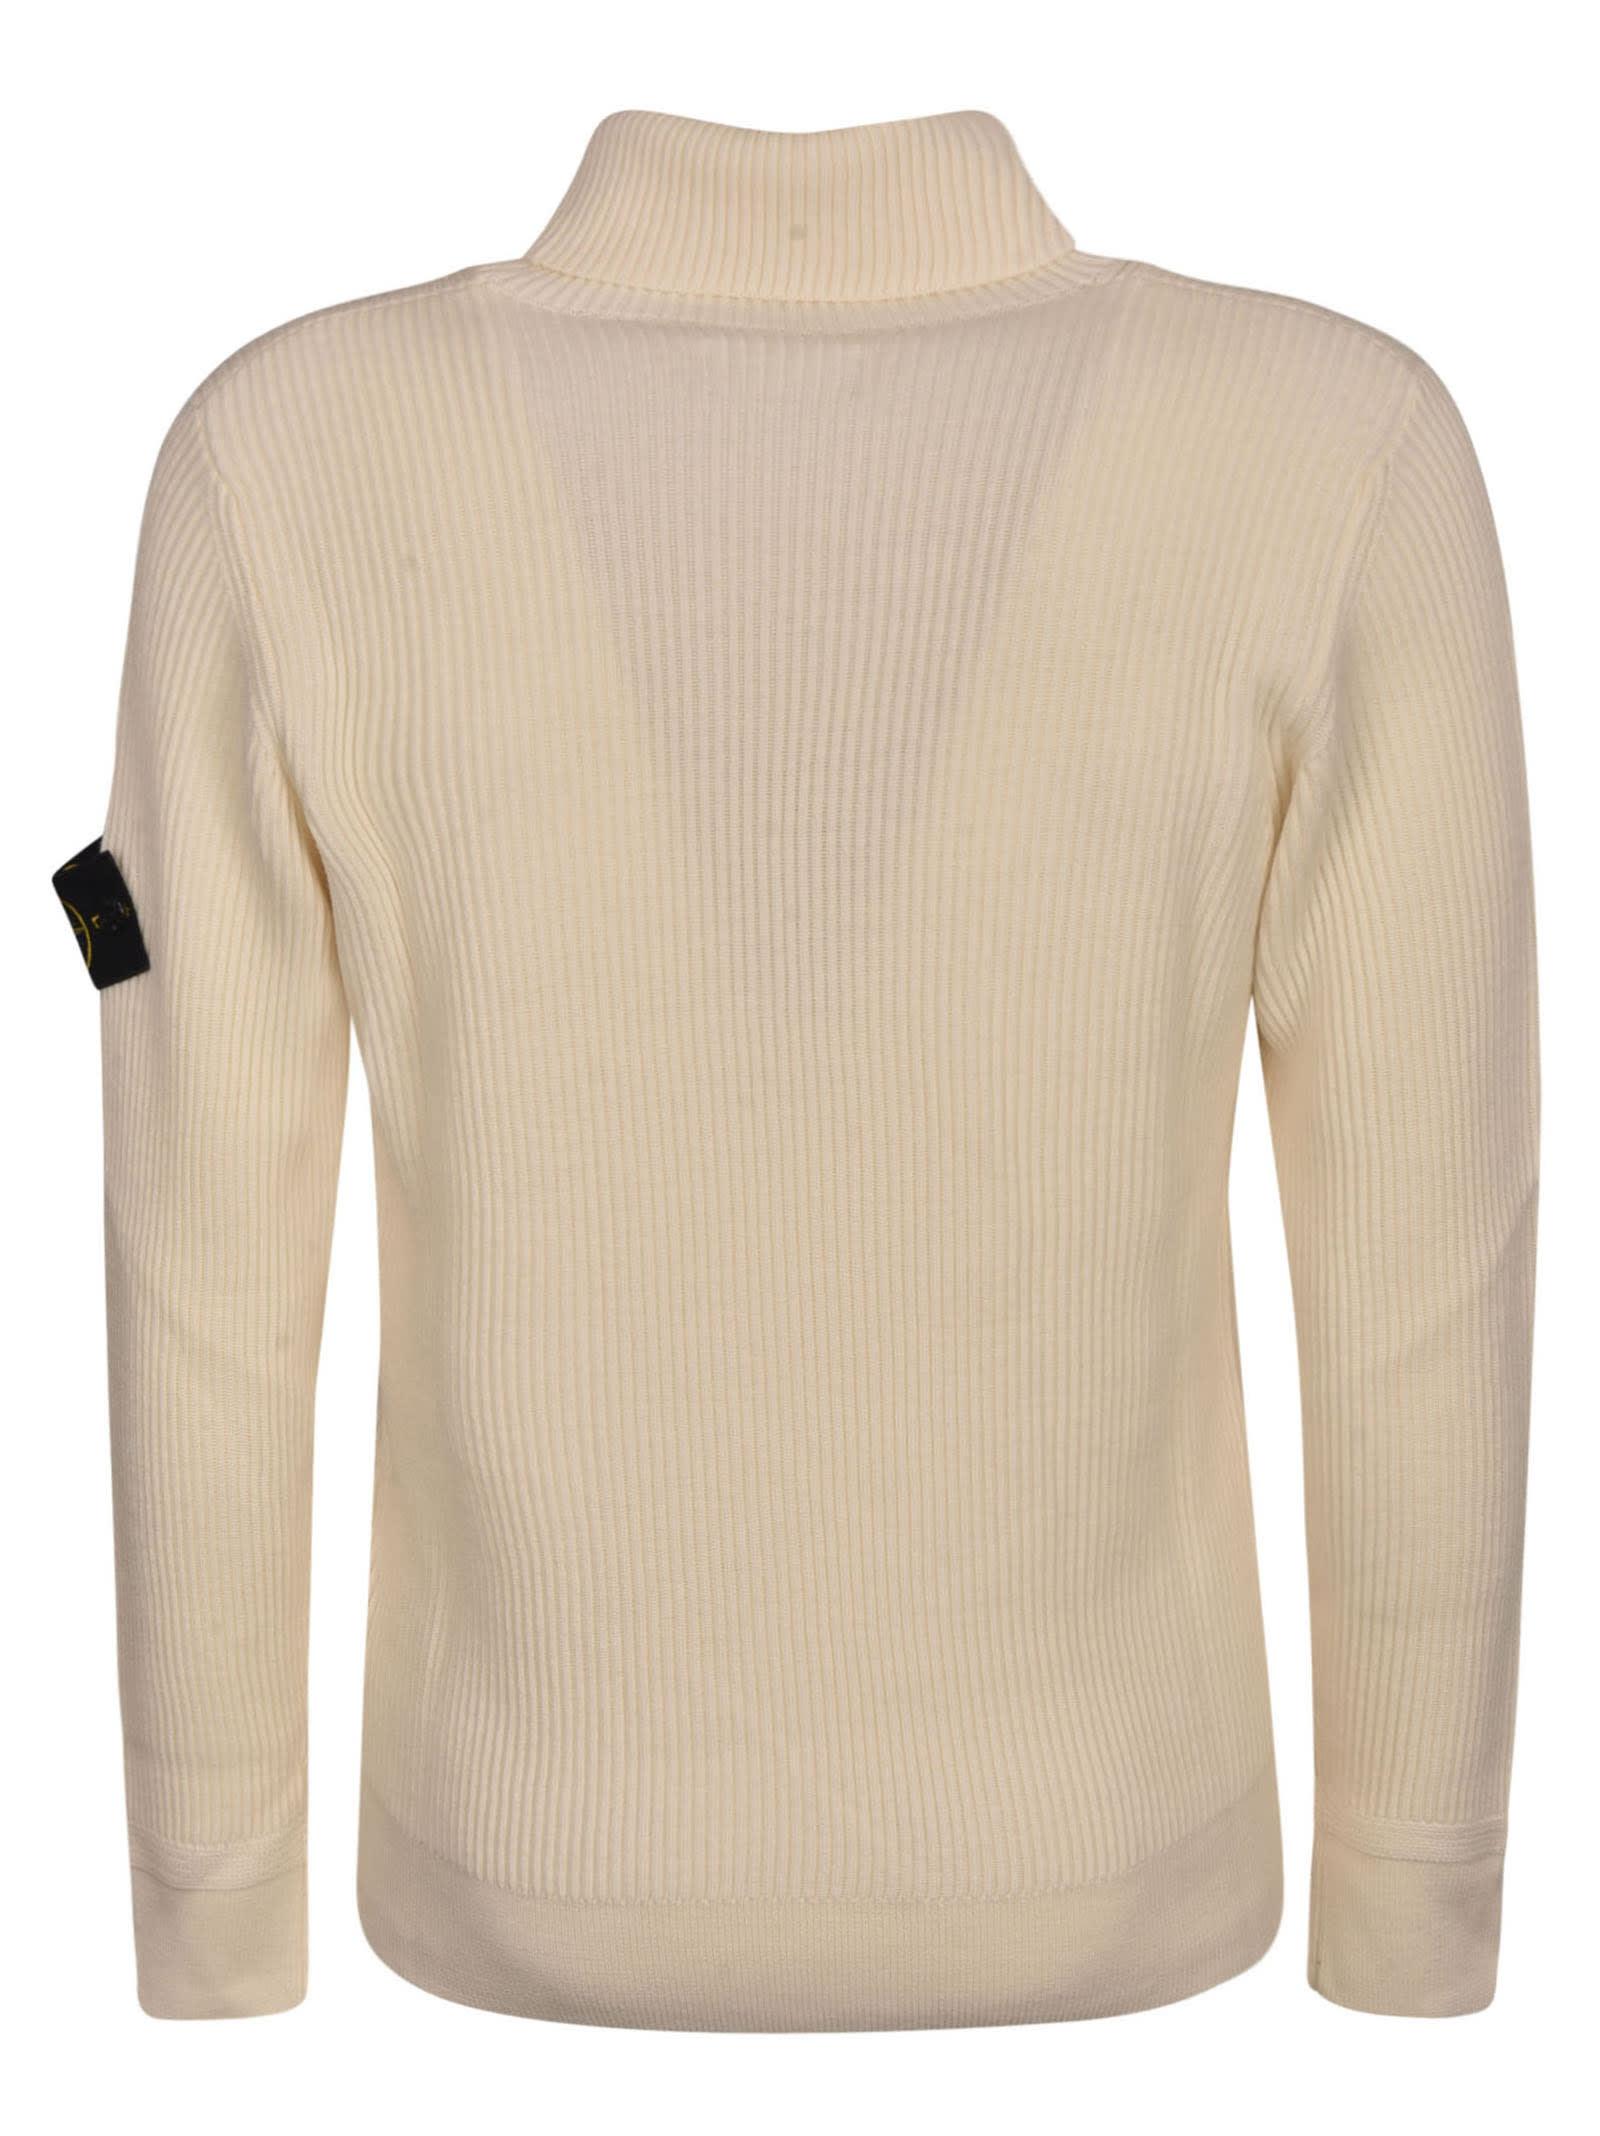 Stone Island Wool Logo Ribbed Sweater in Natural for Men - Save 41% | Lyst